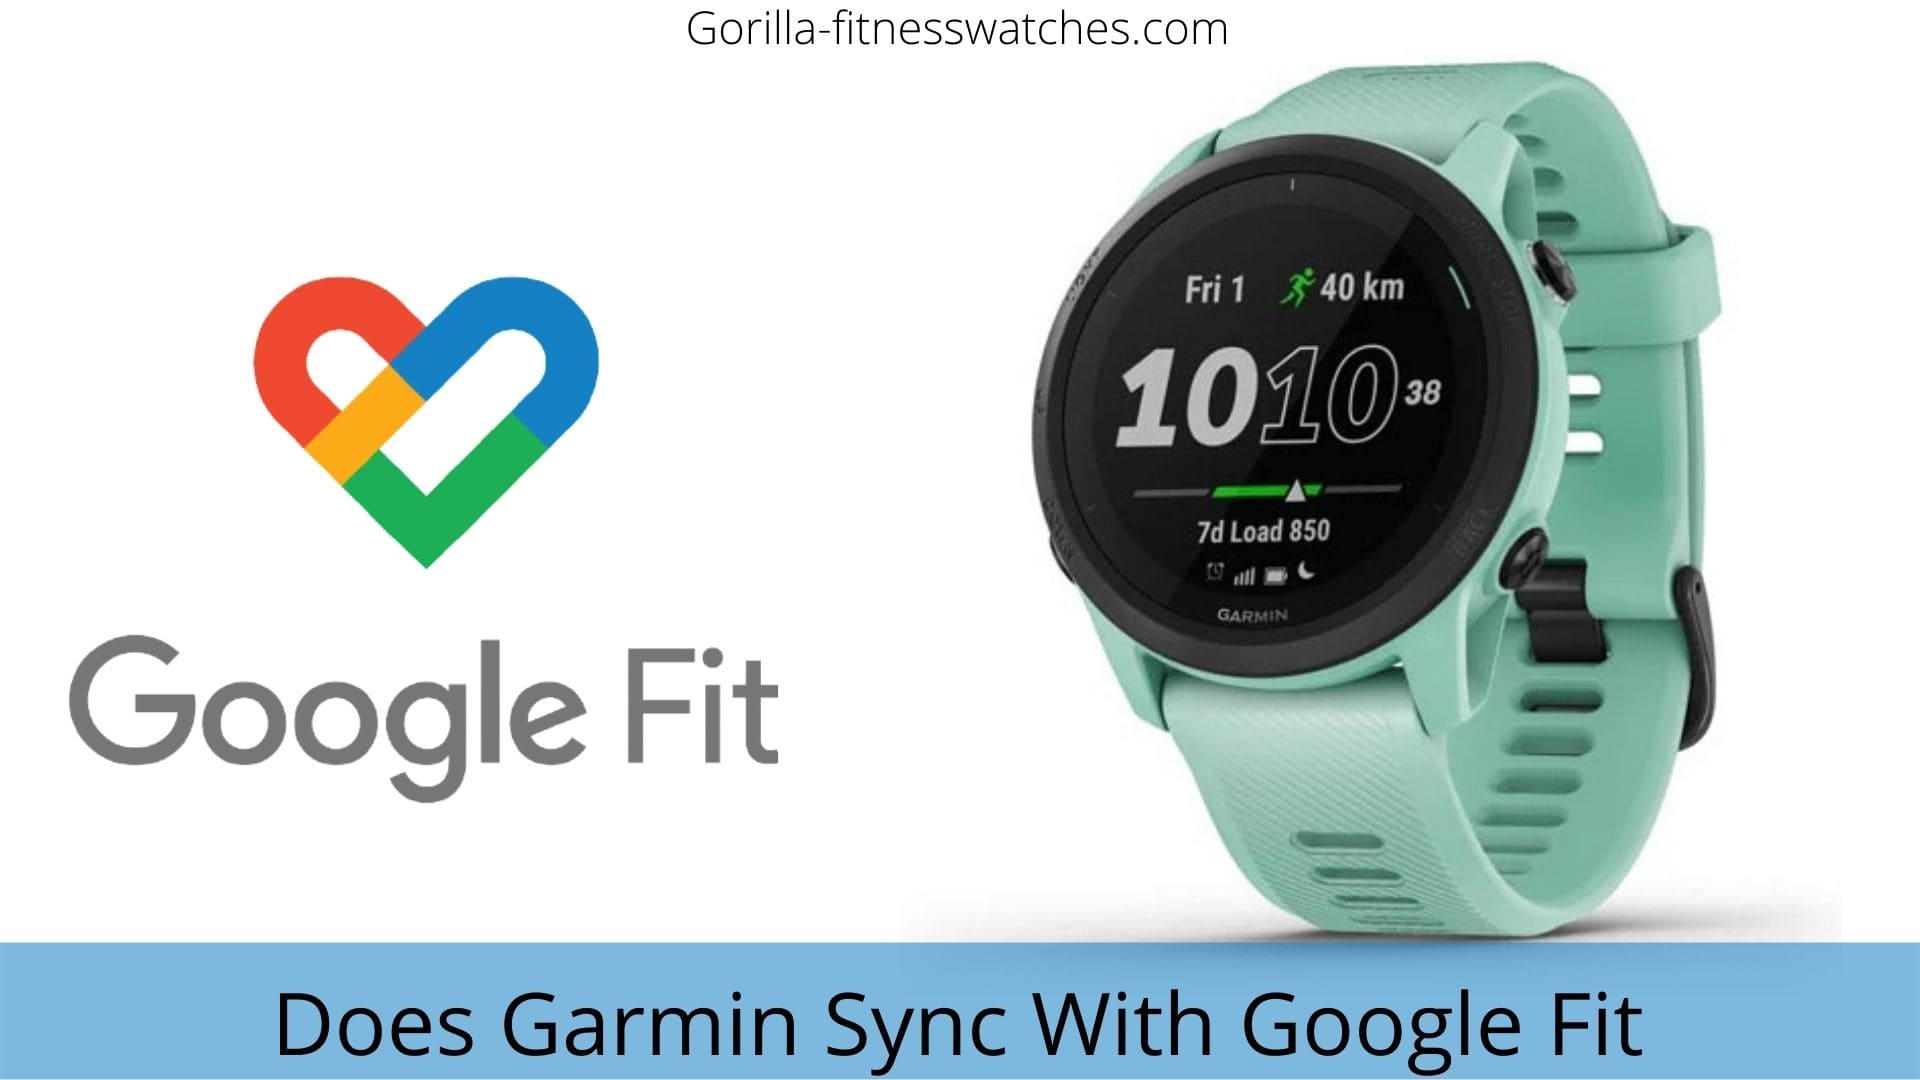 Does Garmin Sync With Google Fit